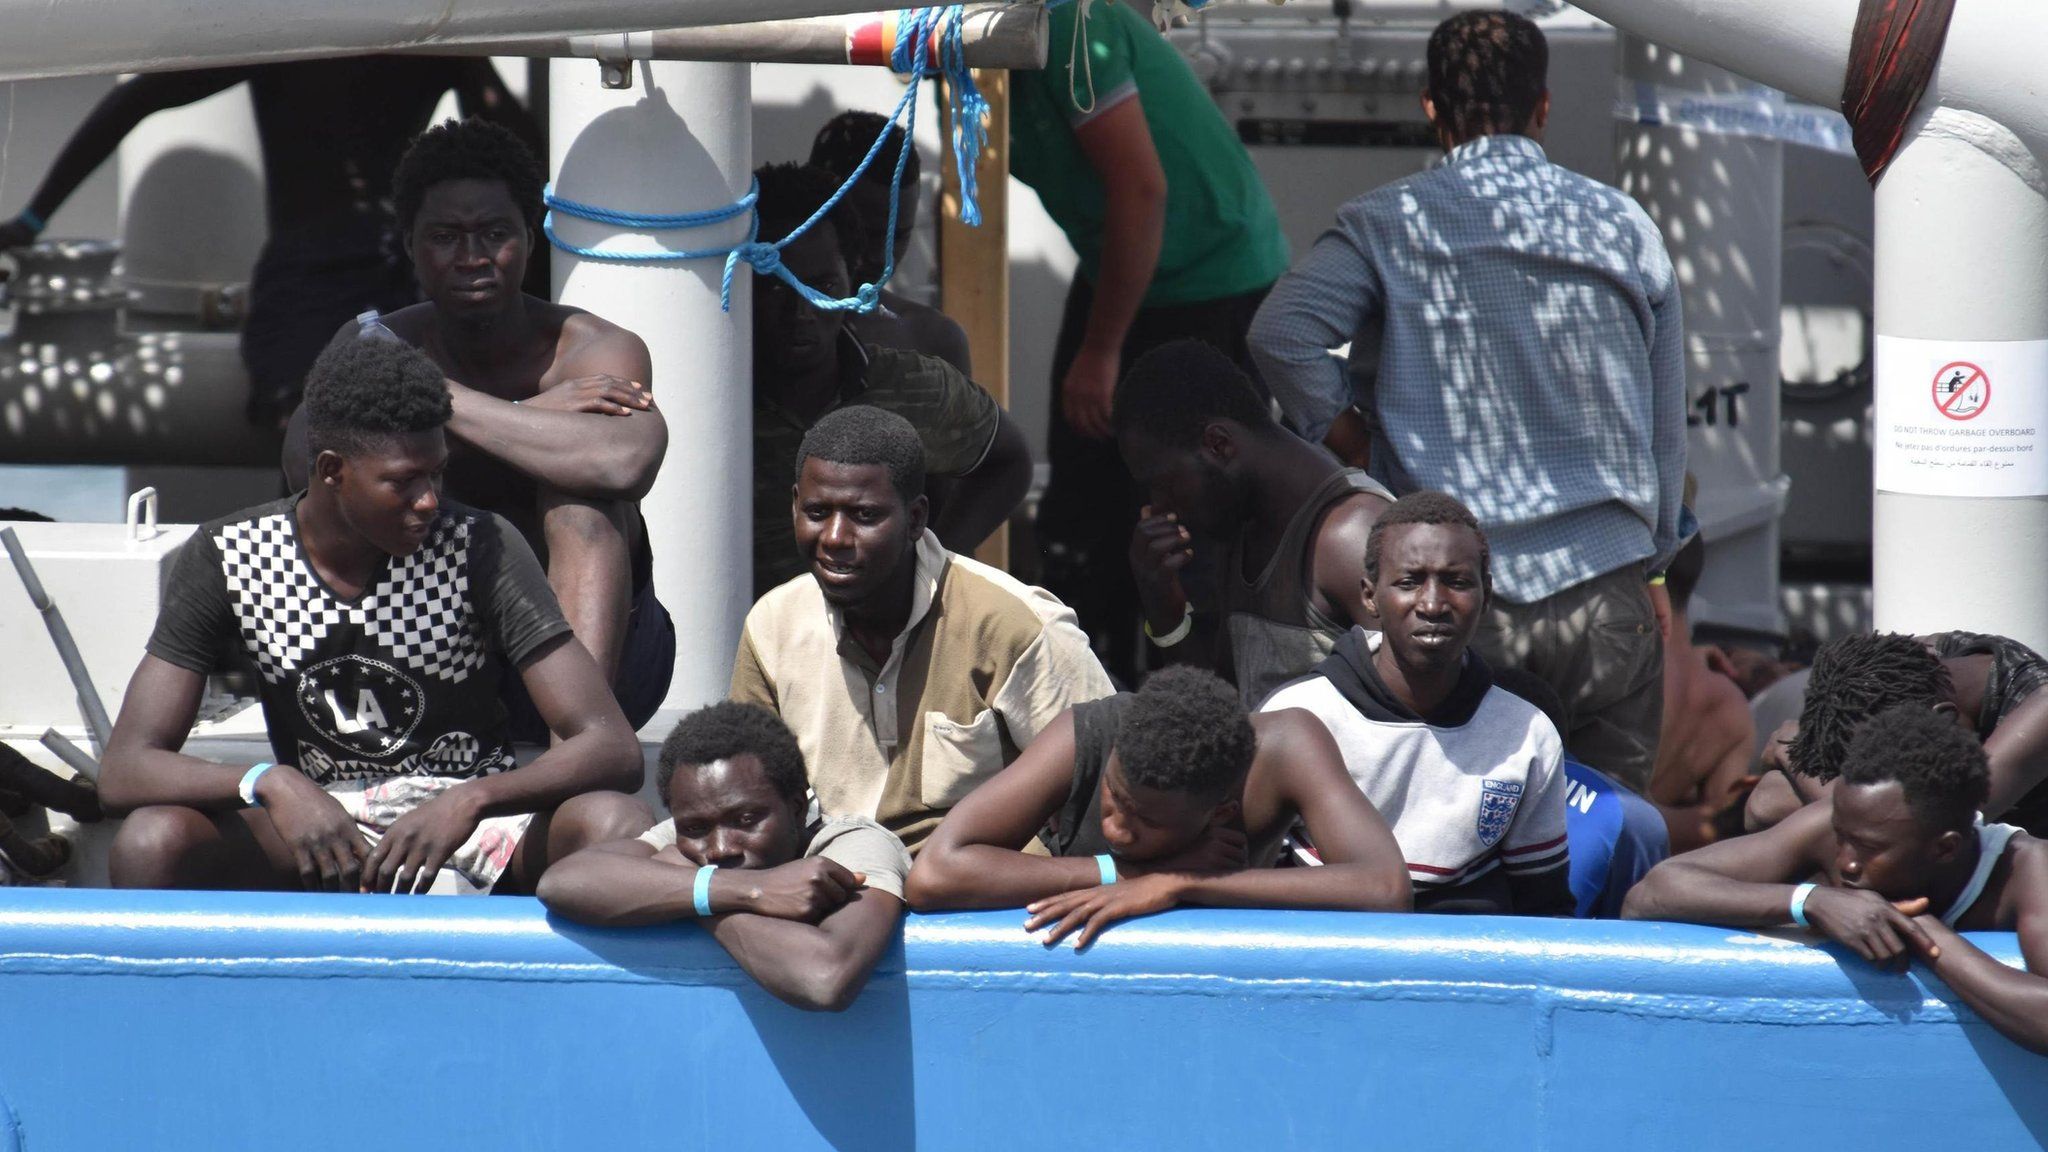 Some of the 650 migrants who were rescued by the Swedish ship Frontex in Mediterranean Sea off the Libyan coast, wait to disembark in Catania, Italy, 01 July 2017